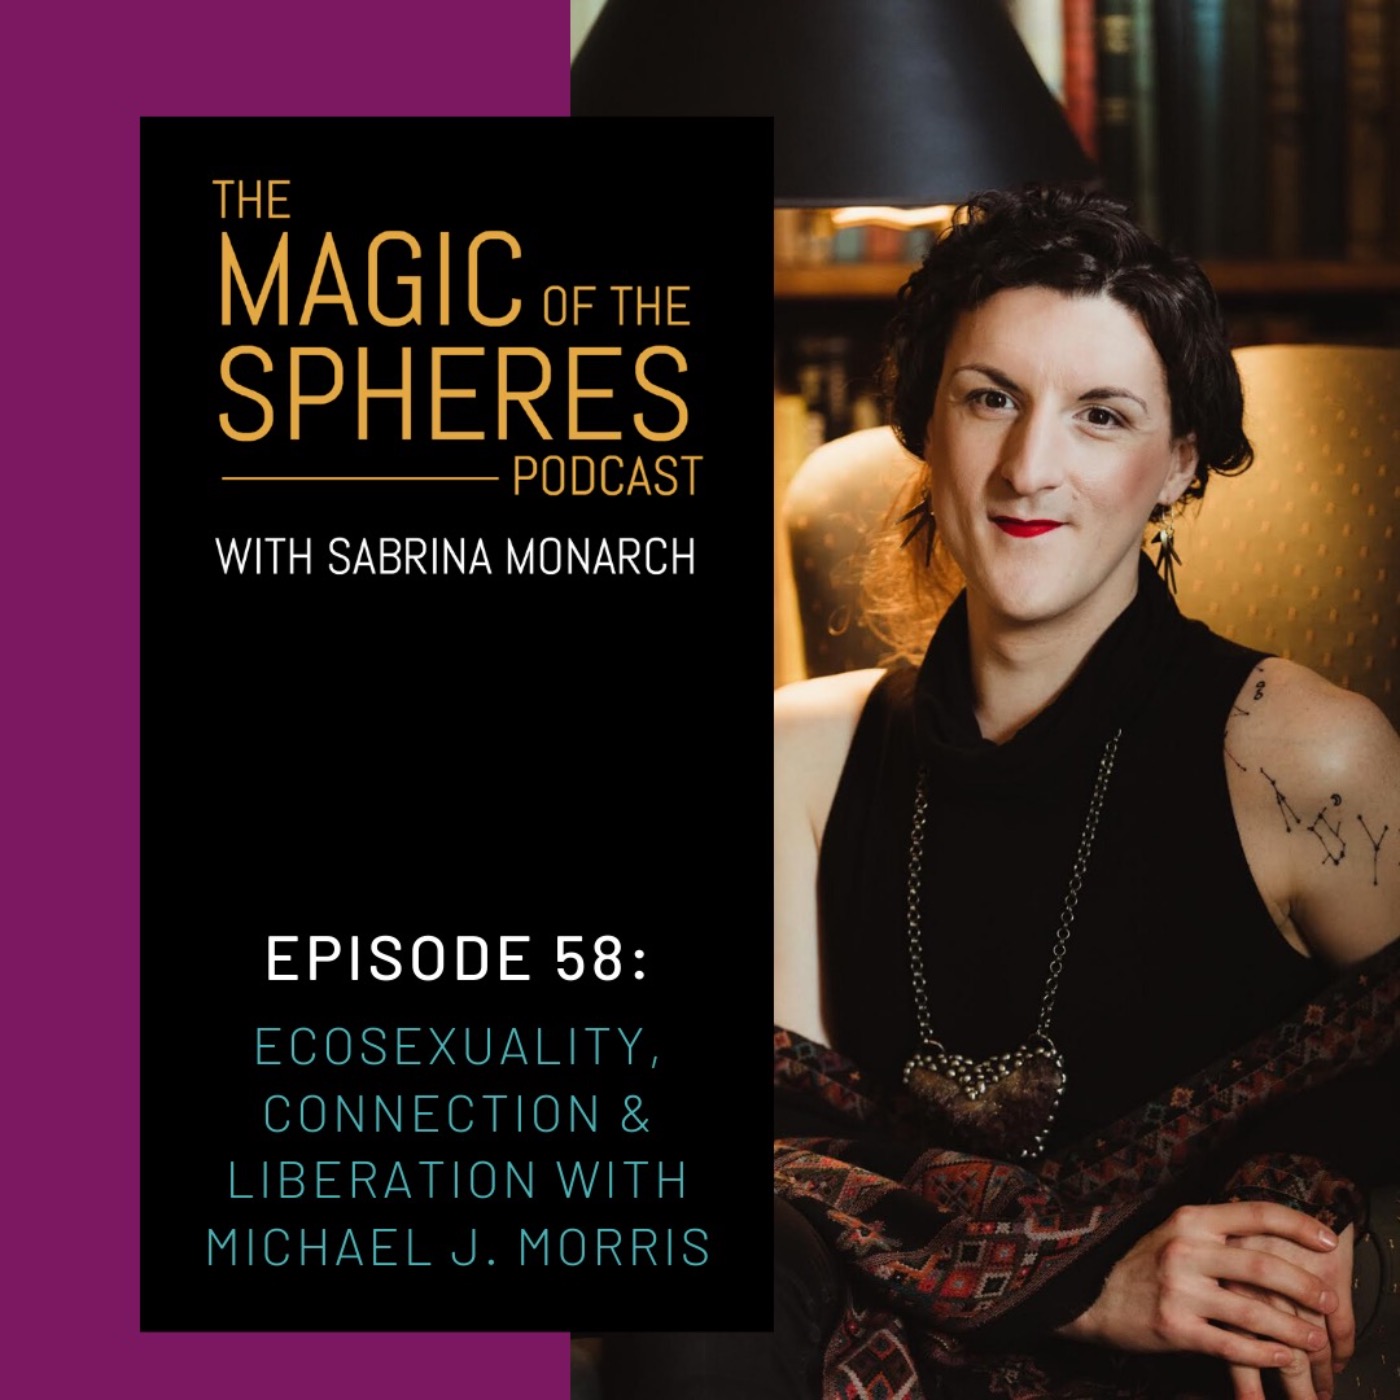 Ecosexuality, Connection & Liberation with Michael J. Morris